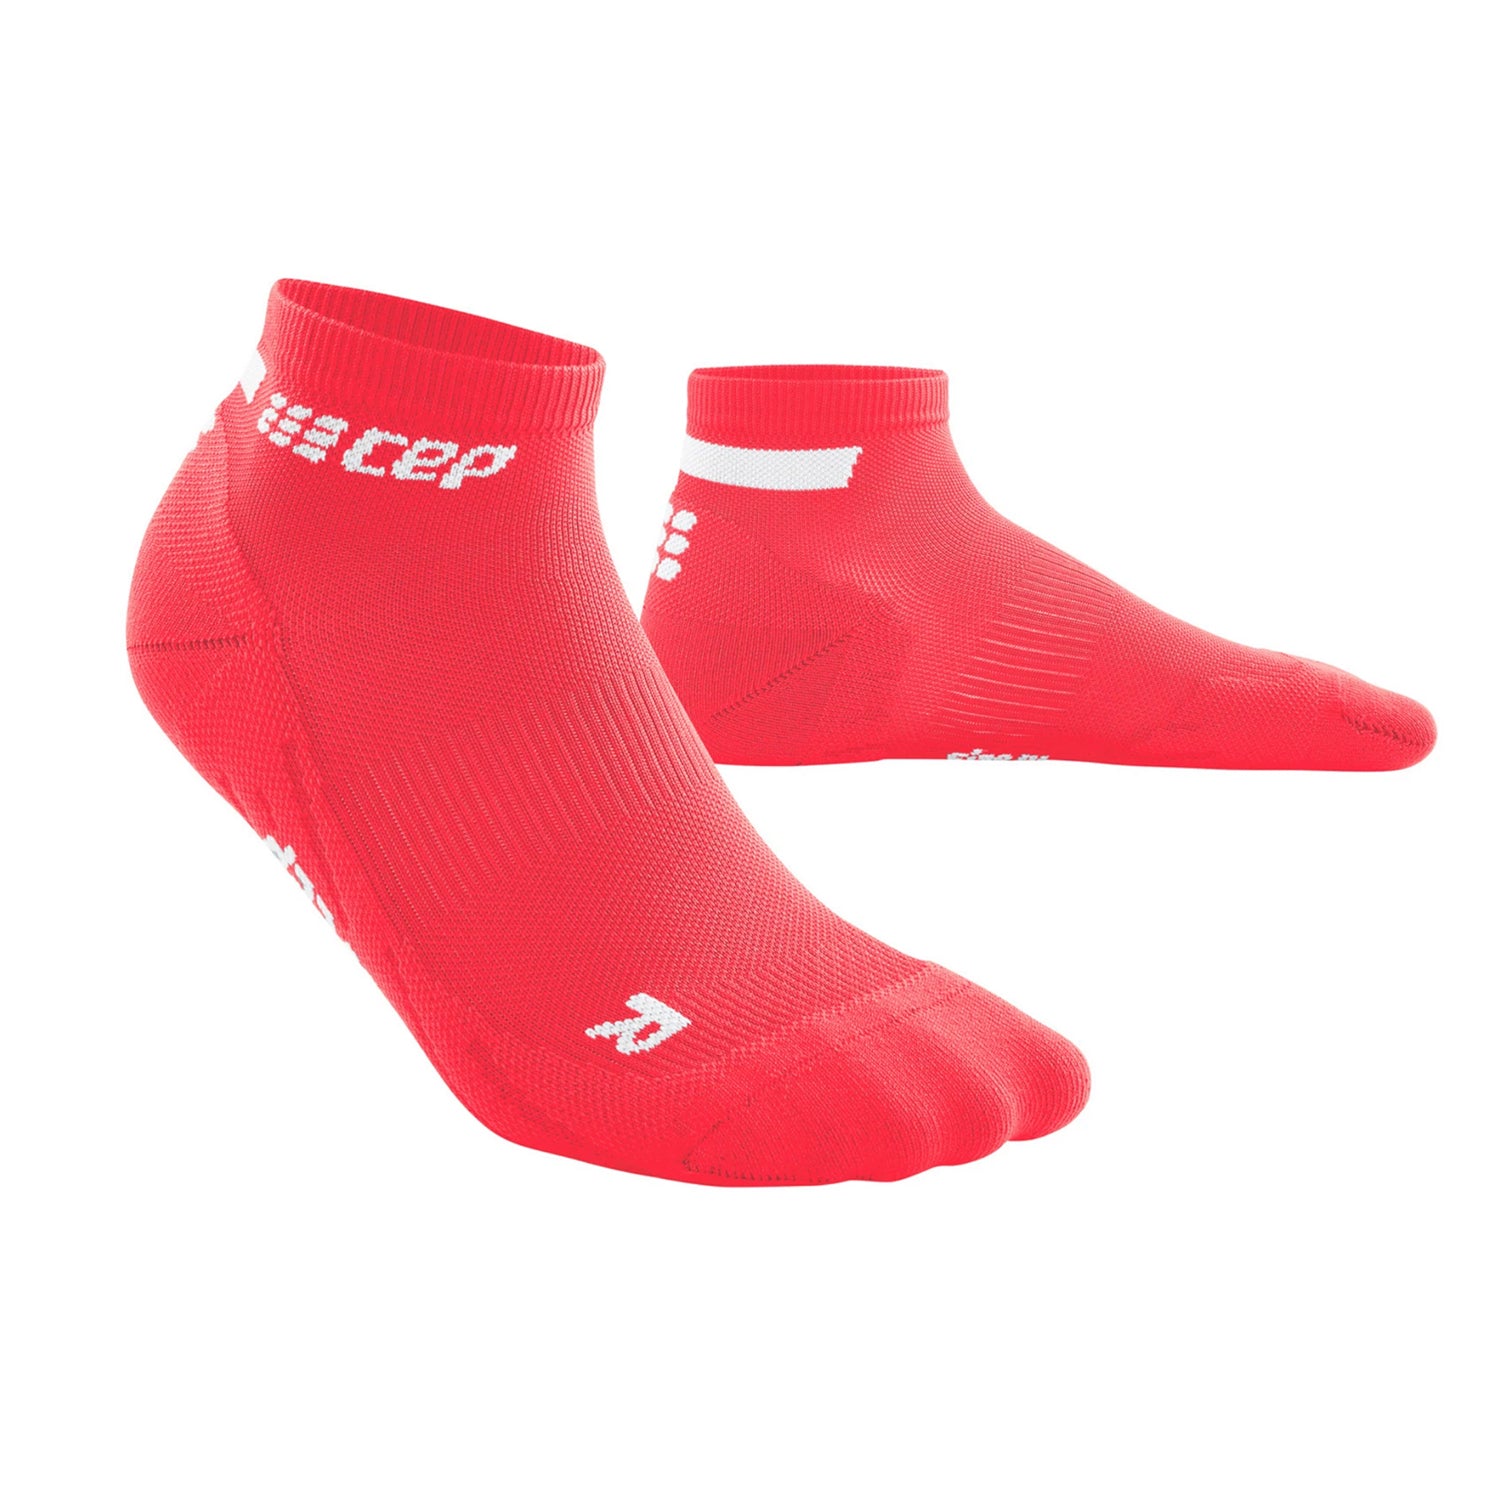 R-Gear CEP Compression Running Socks For Men, No Show, Heel Tab |  Breathable, Maintain Blood Circulation | 3 Pack